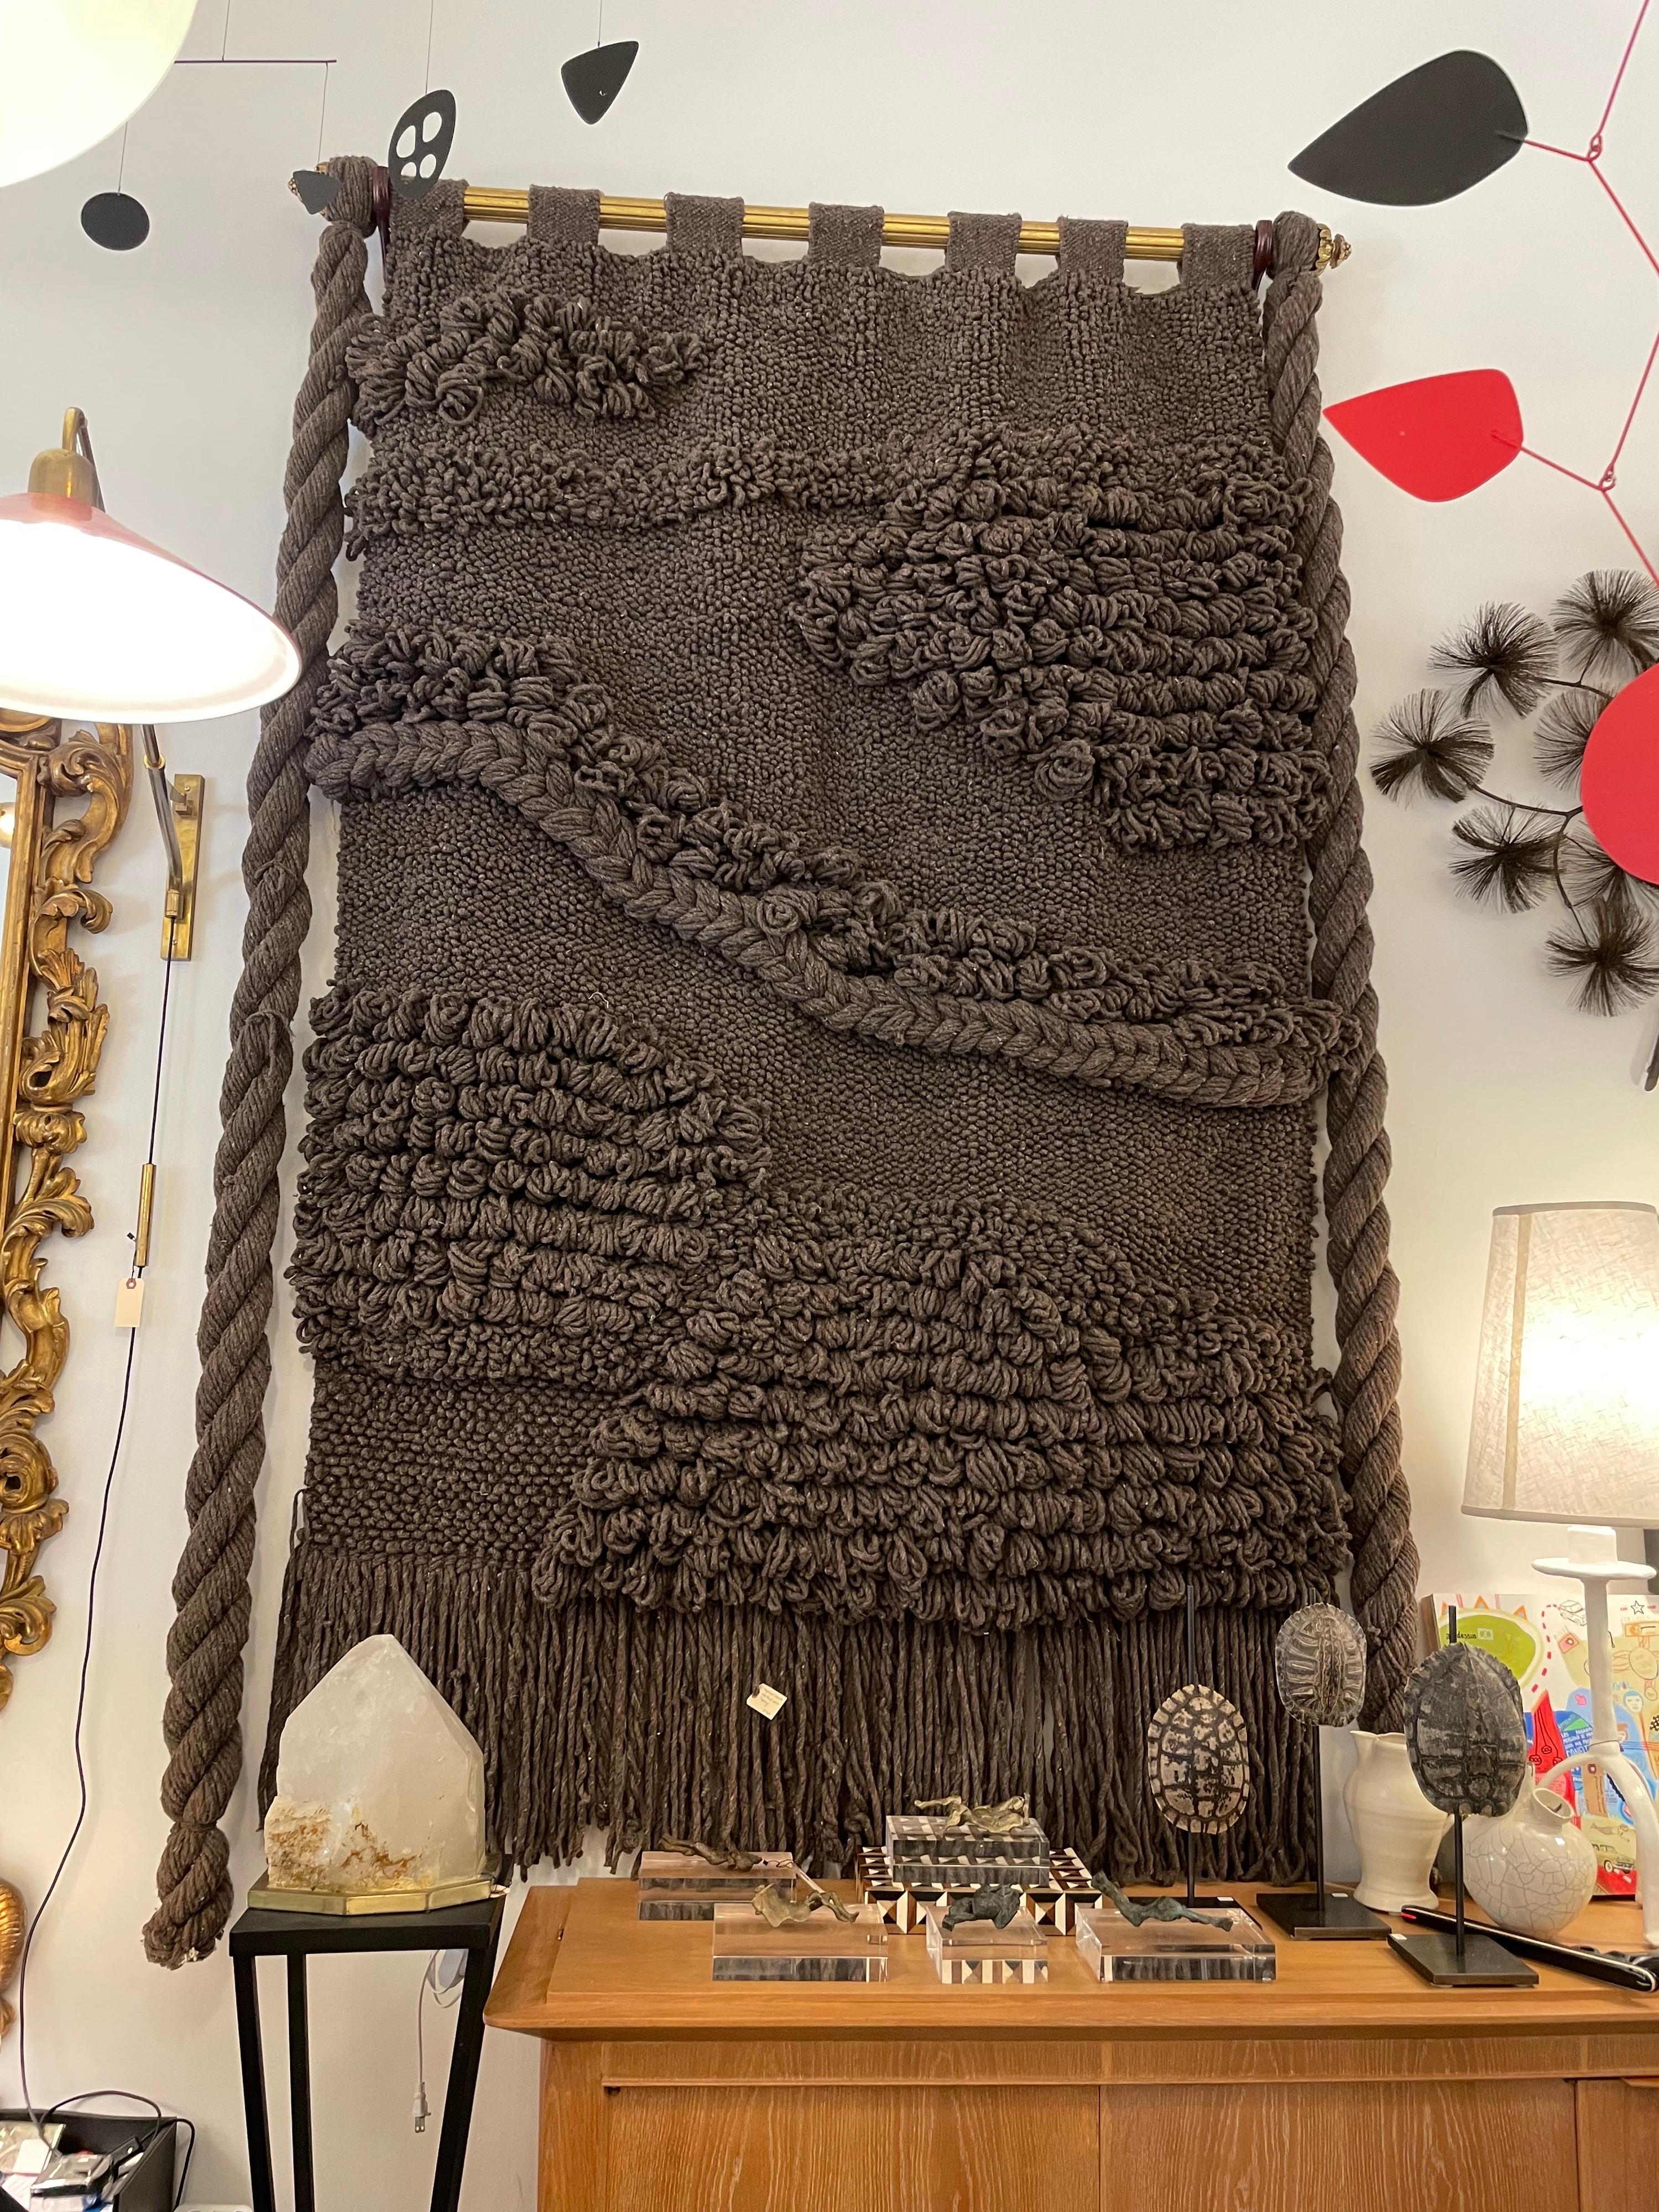 Huge Hand Woven Wool Wall Tapestry in Chocolate/Charcoal Tone For Sale 1